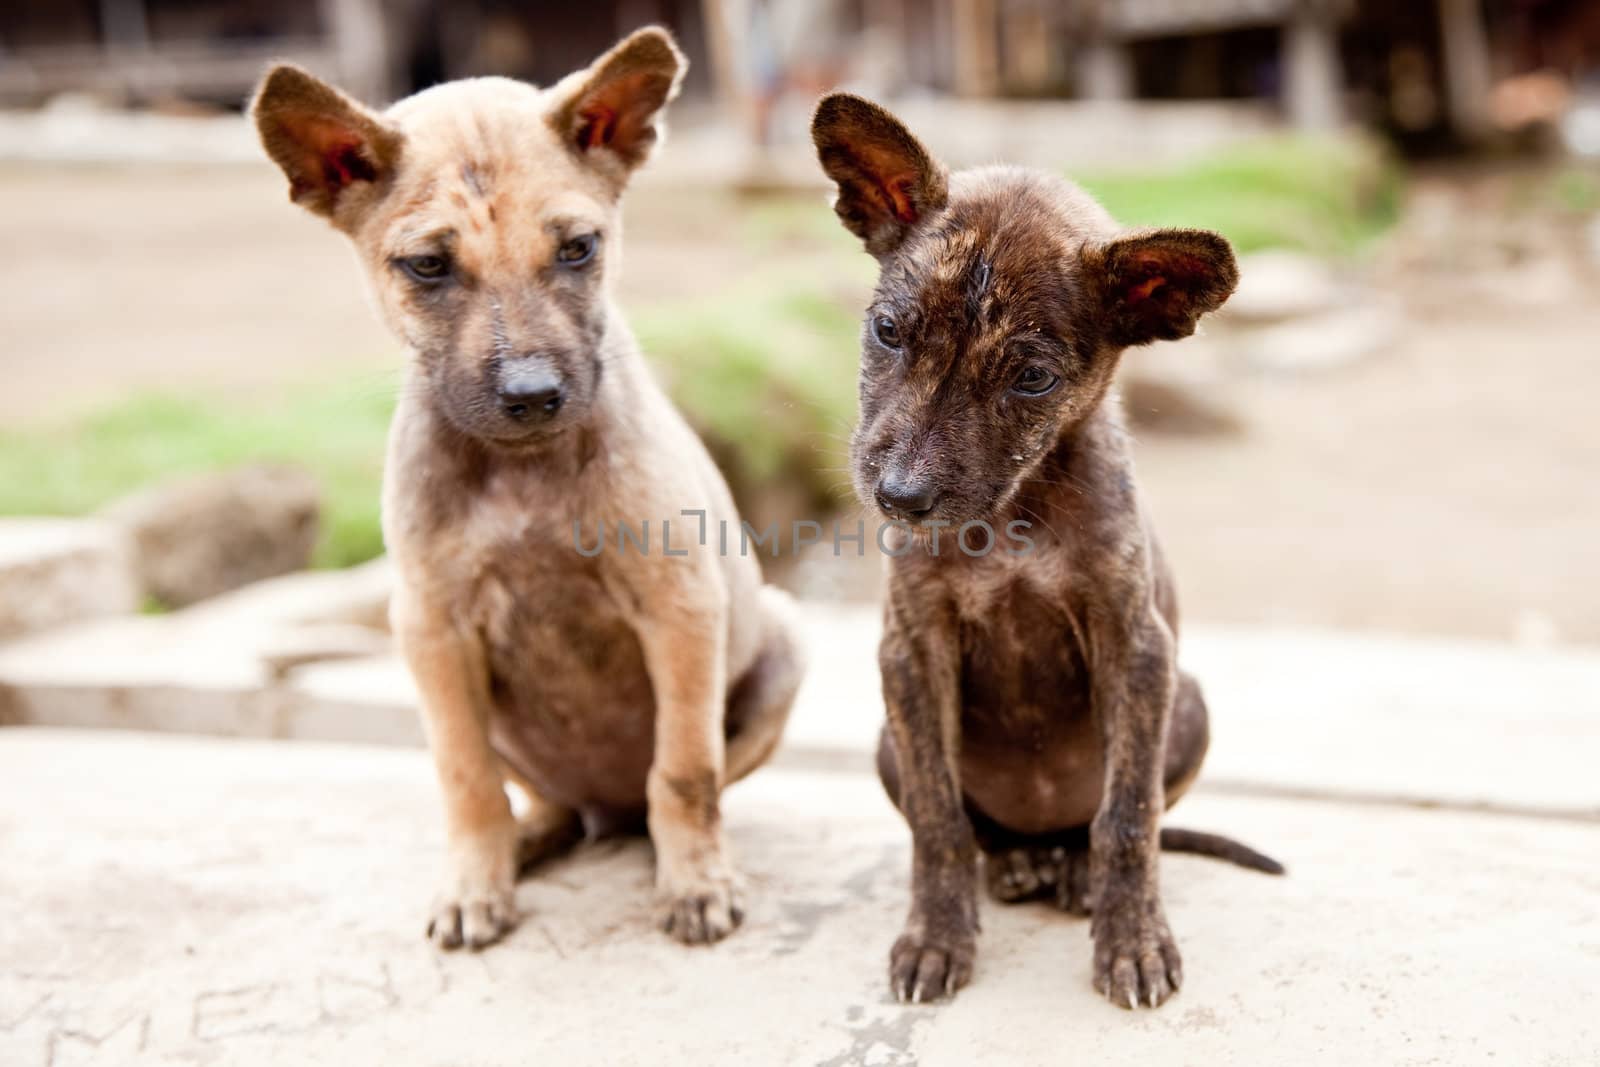 Little stray dogs by Fotosmurf